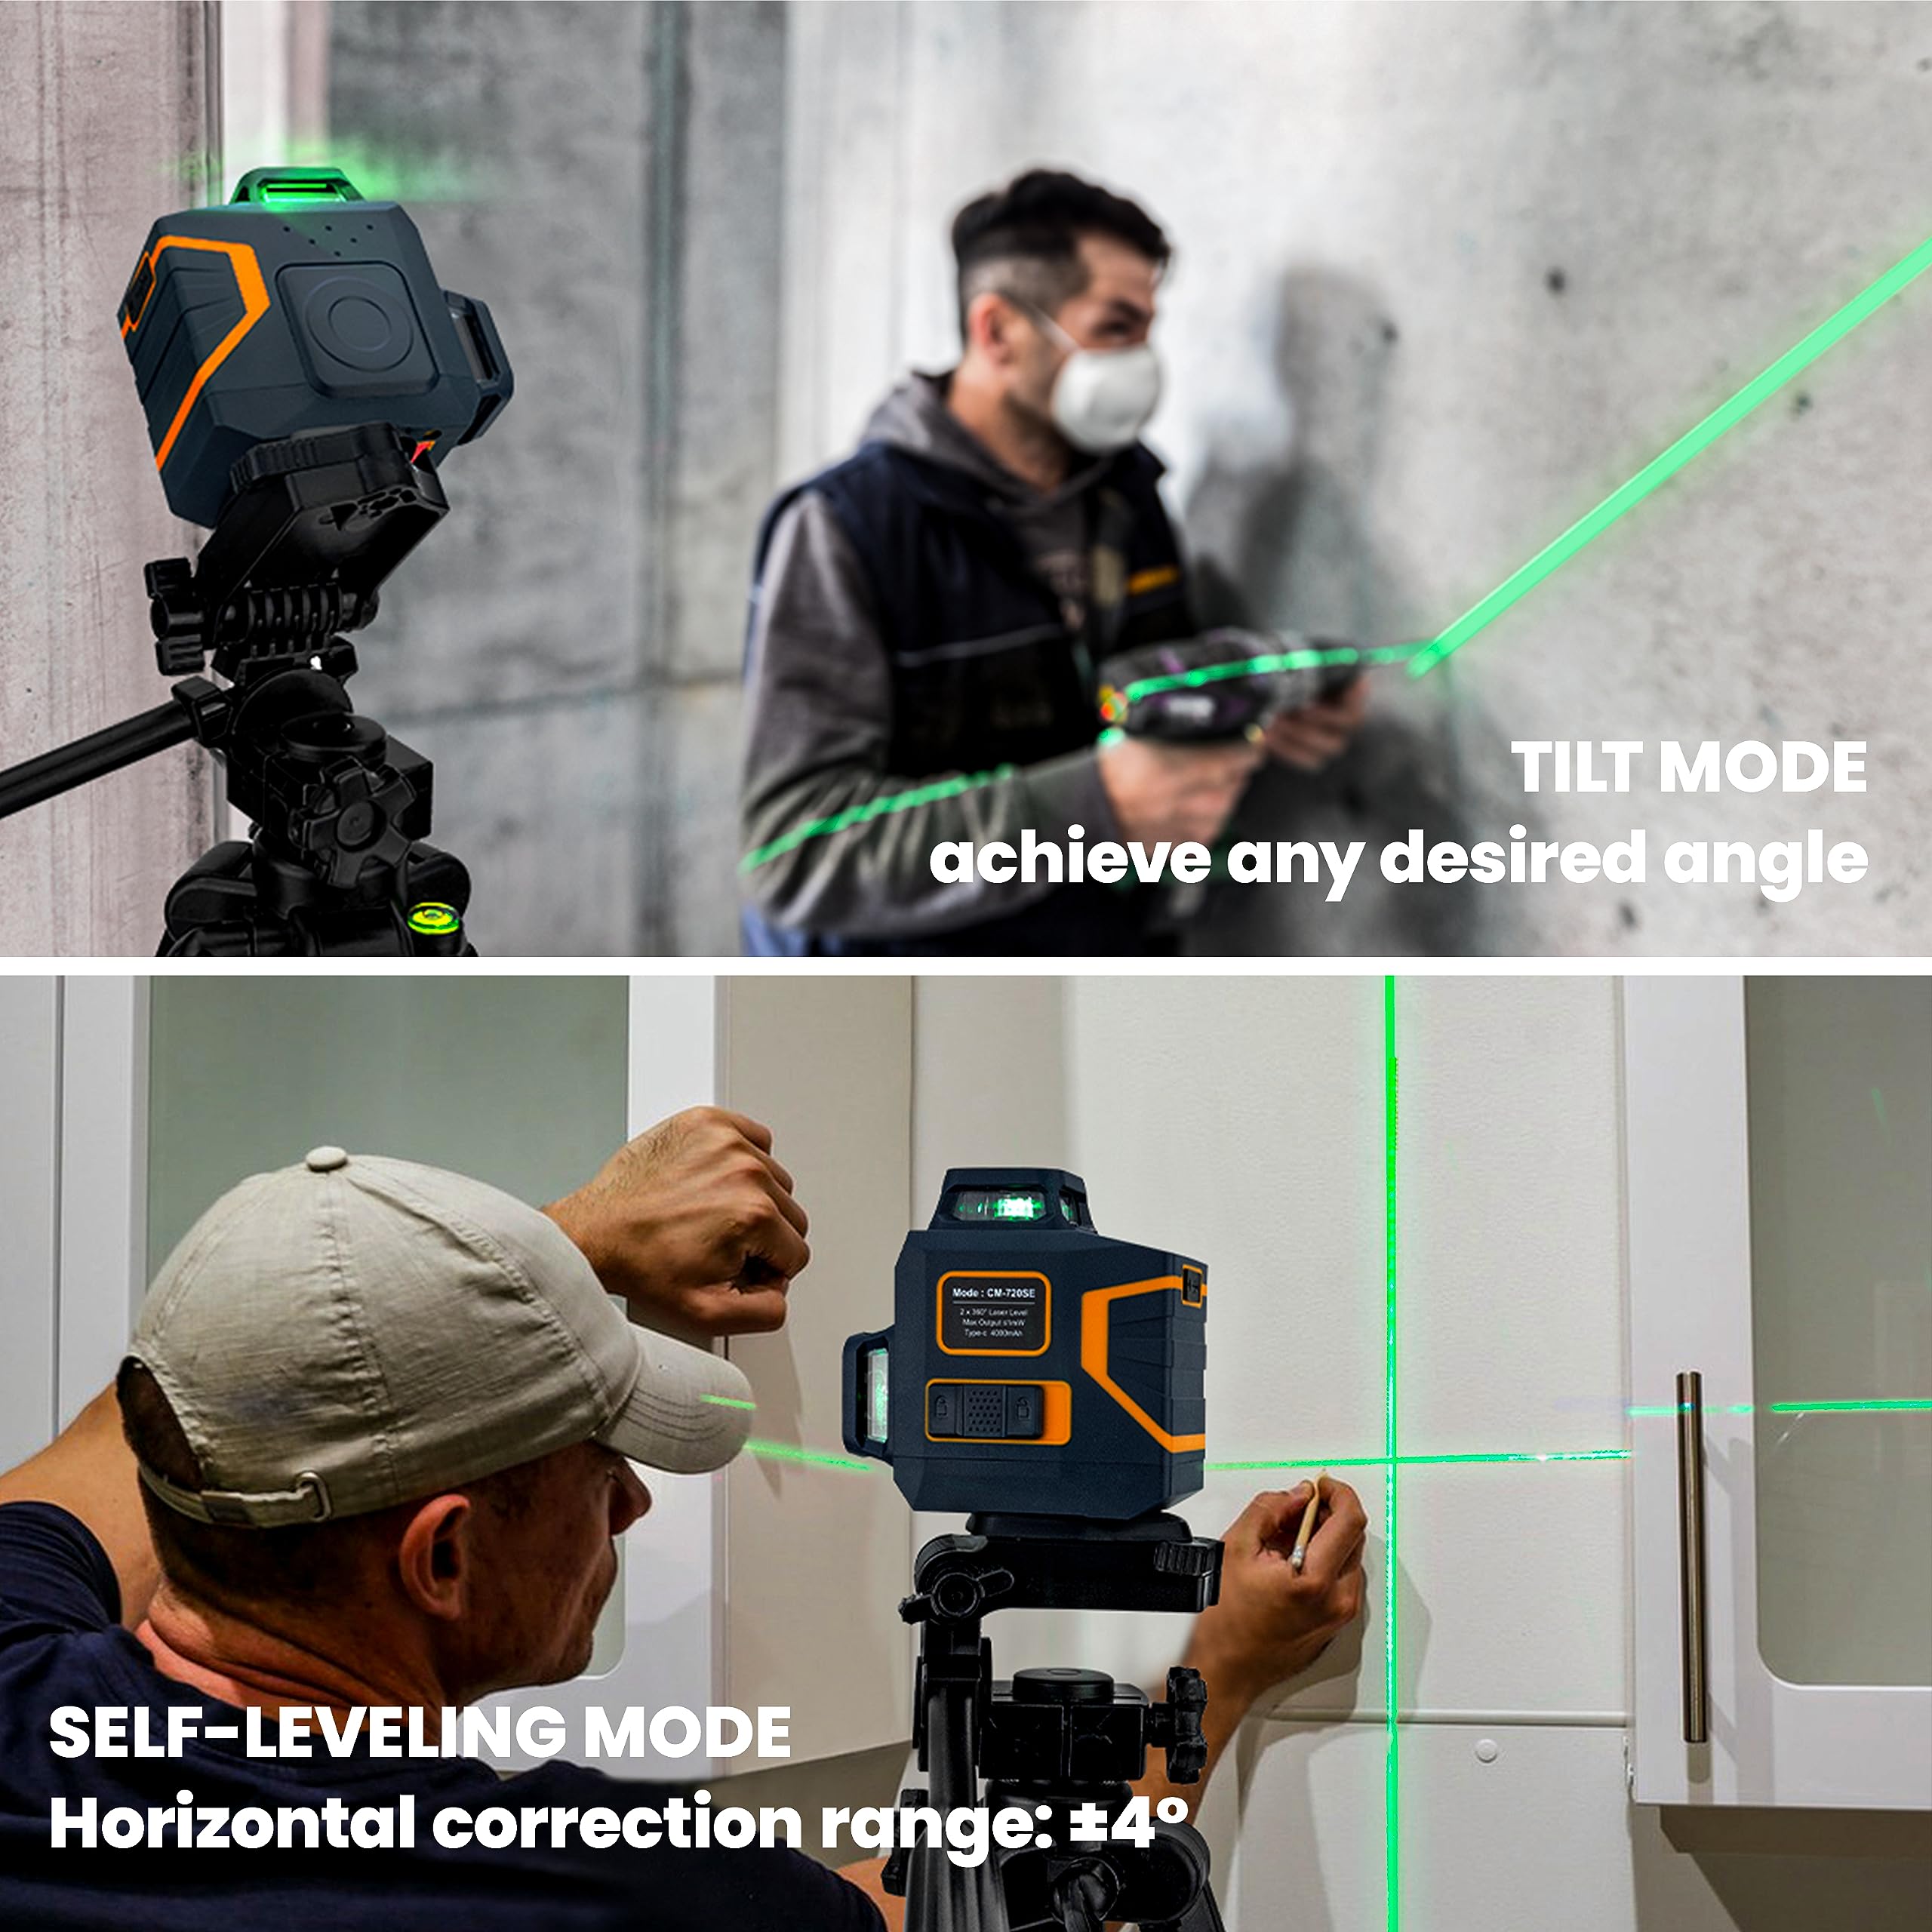 CIGMAN CM-720SE 8 Lines Laser Level  Self Leveling 3x360° Green Cross Line for Construction, Picture Hanging and Decoration with Rechargeable Battery and Magnetic L-Shaped Bracket Included